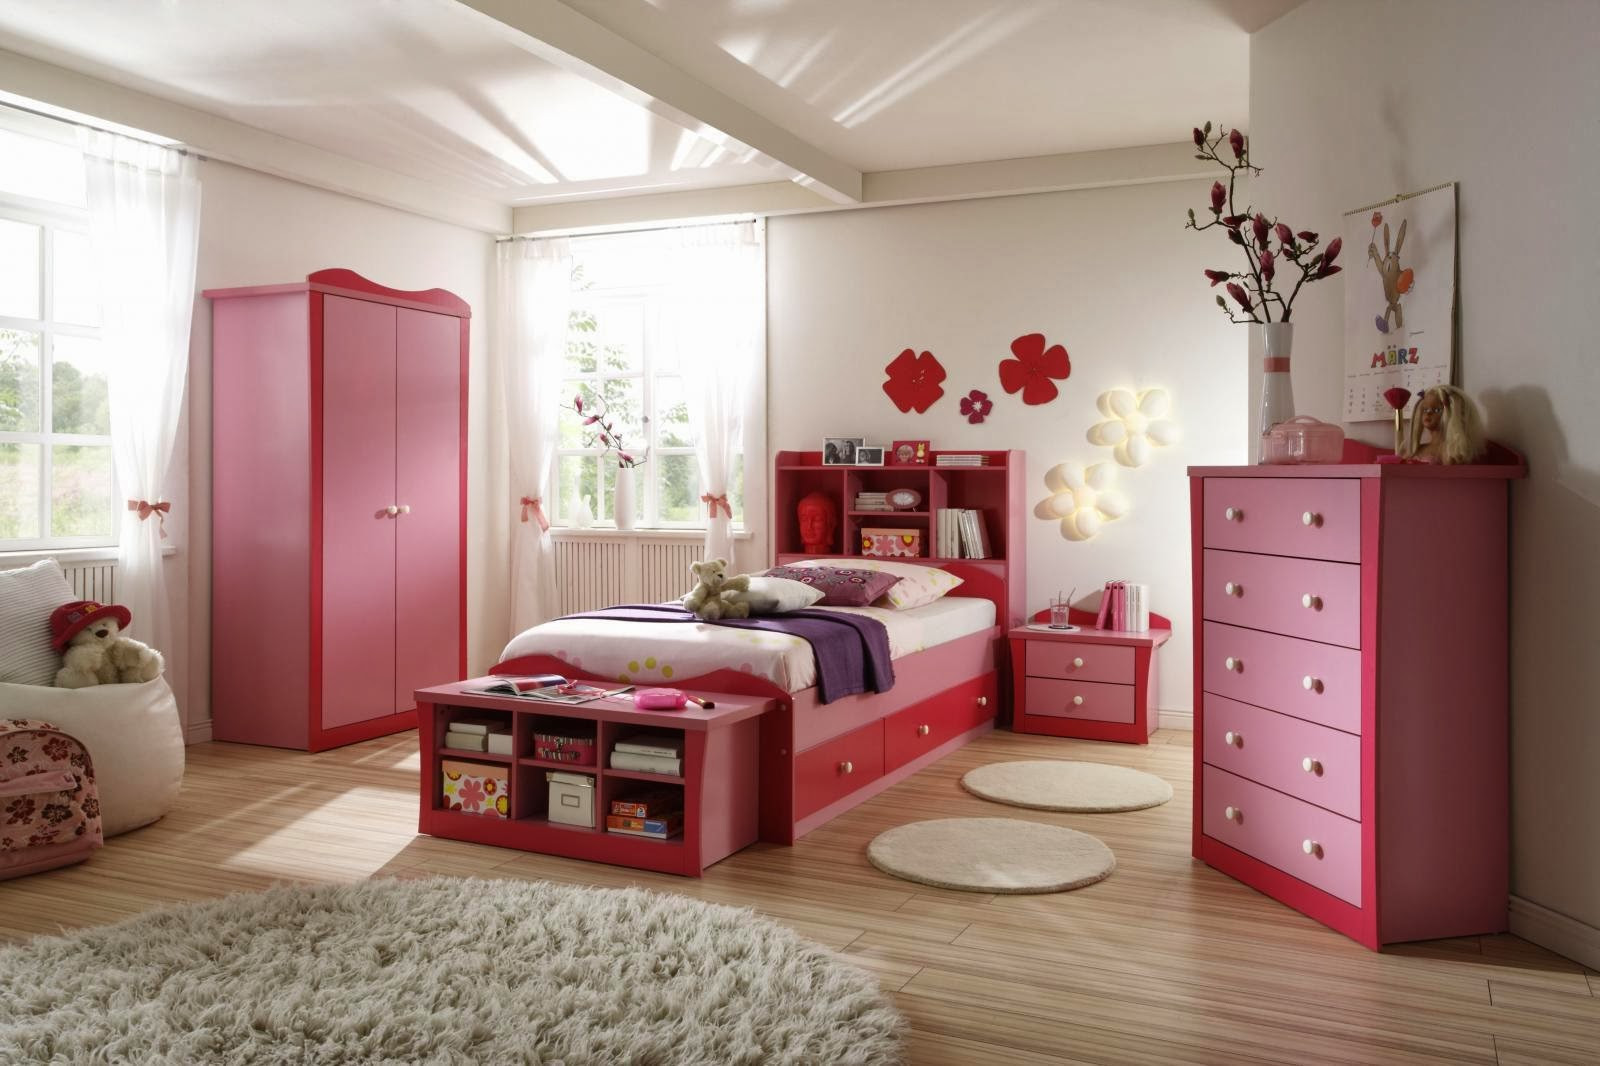 Little Girl Bedroom Paint Ideas
 Home Decorating Interior Design Ideas Pink Bedding for a